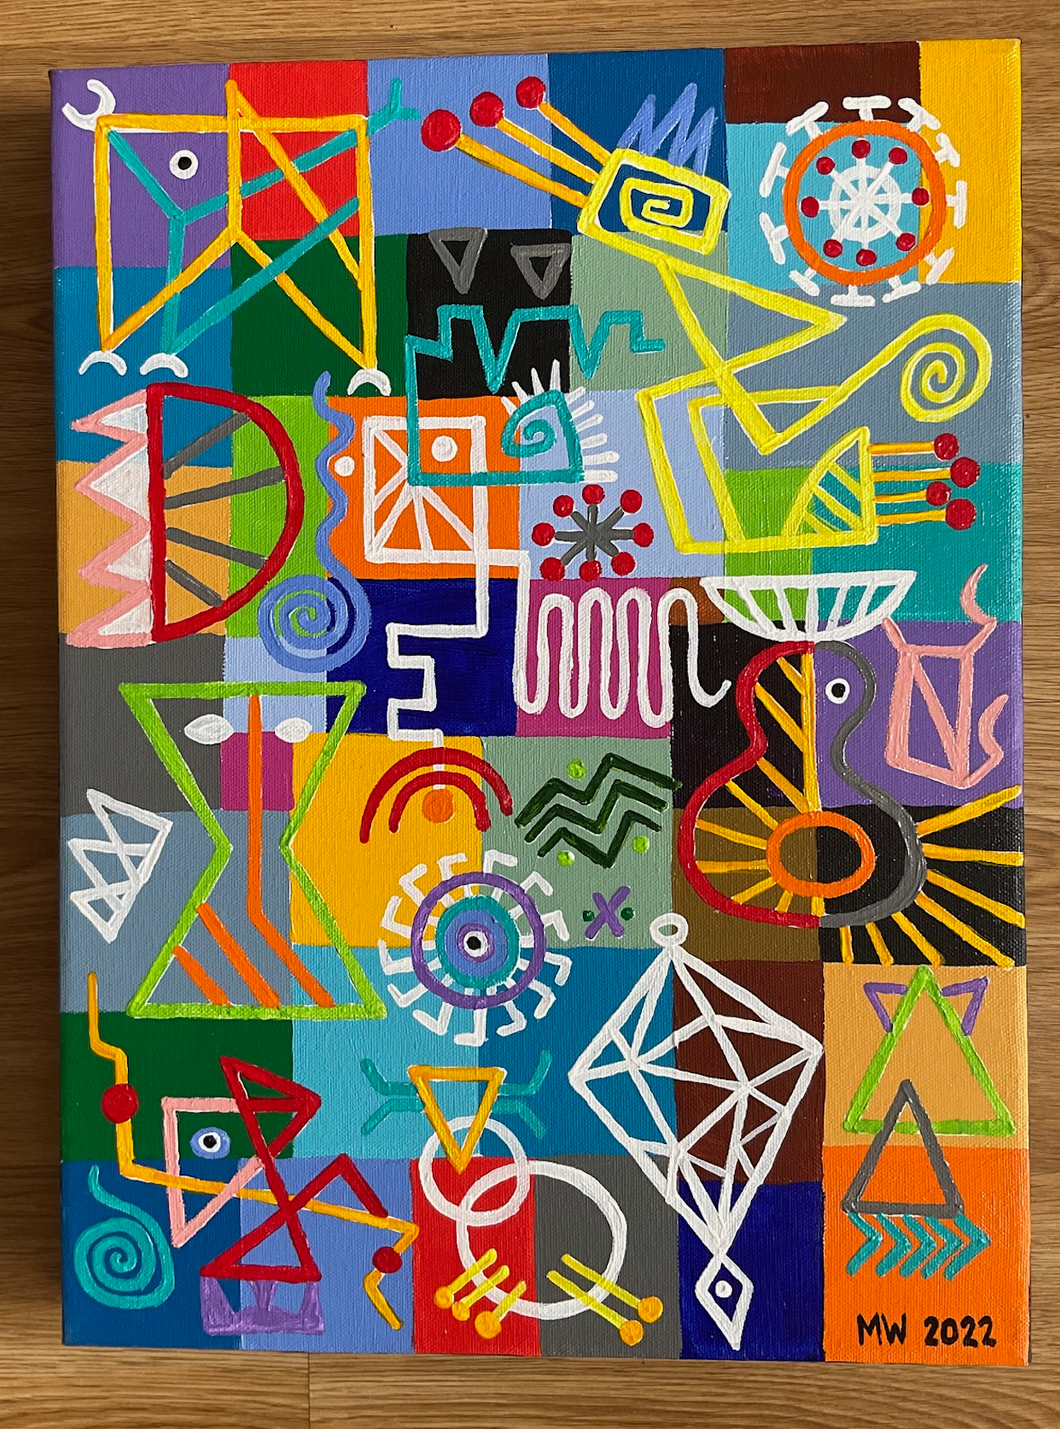 Wiggly Wonderland (acrylic on canvas 2022) 12 x 16 inches